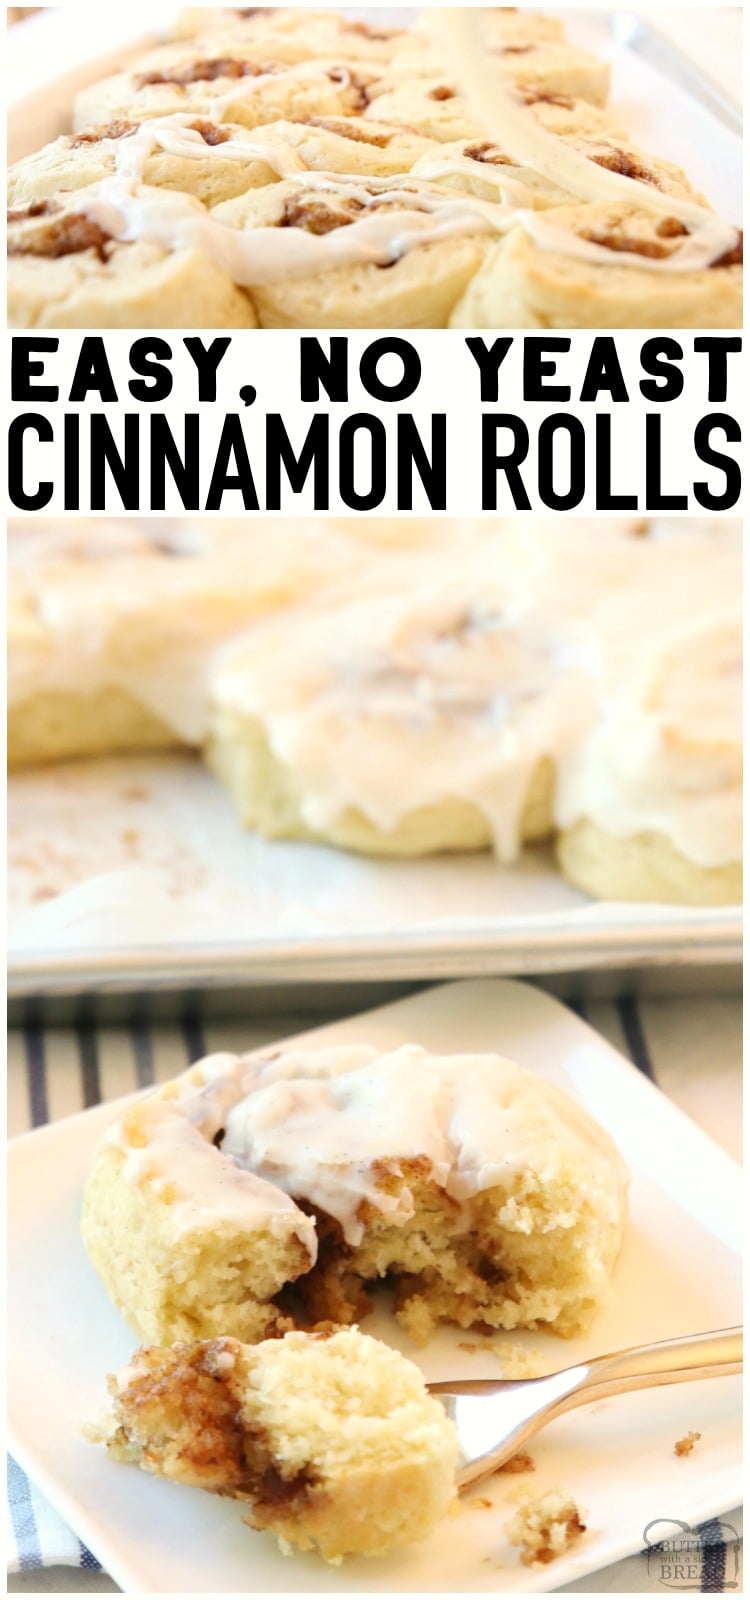 No Yeast Cinnamon Rolls that comes together in minutes and are light, fluffy and amazing! Great texture and cinnamon flavor in this quick & easy cinnamon roll recipe. #cinnamonrolls #cinnamonrollsrecipe #noyeast #noyeastcinnamonrolls #recipefrom Butter With a Side of Bread